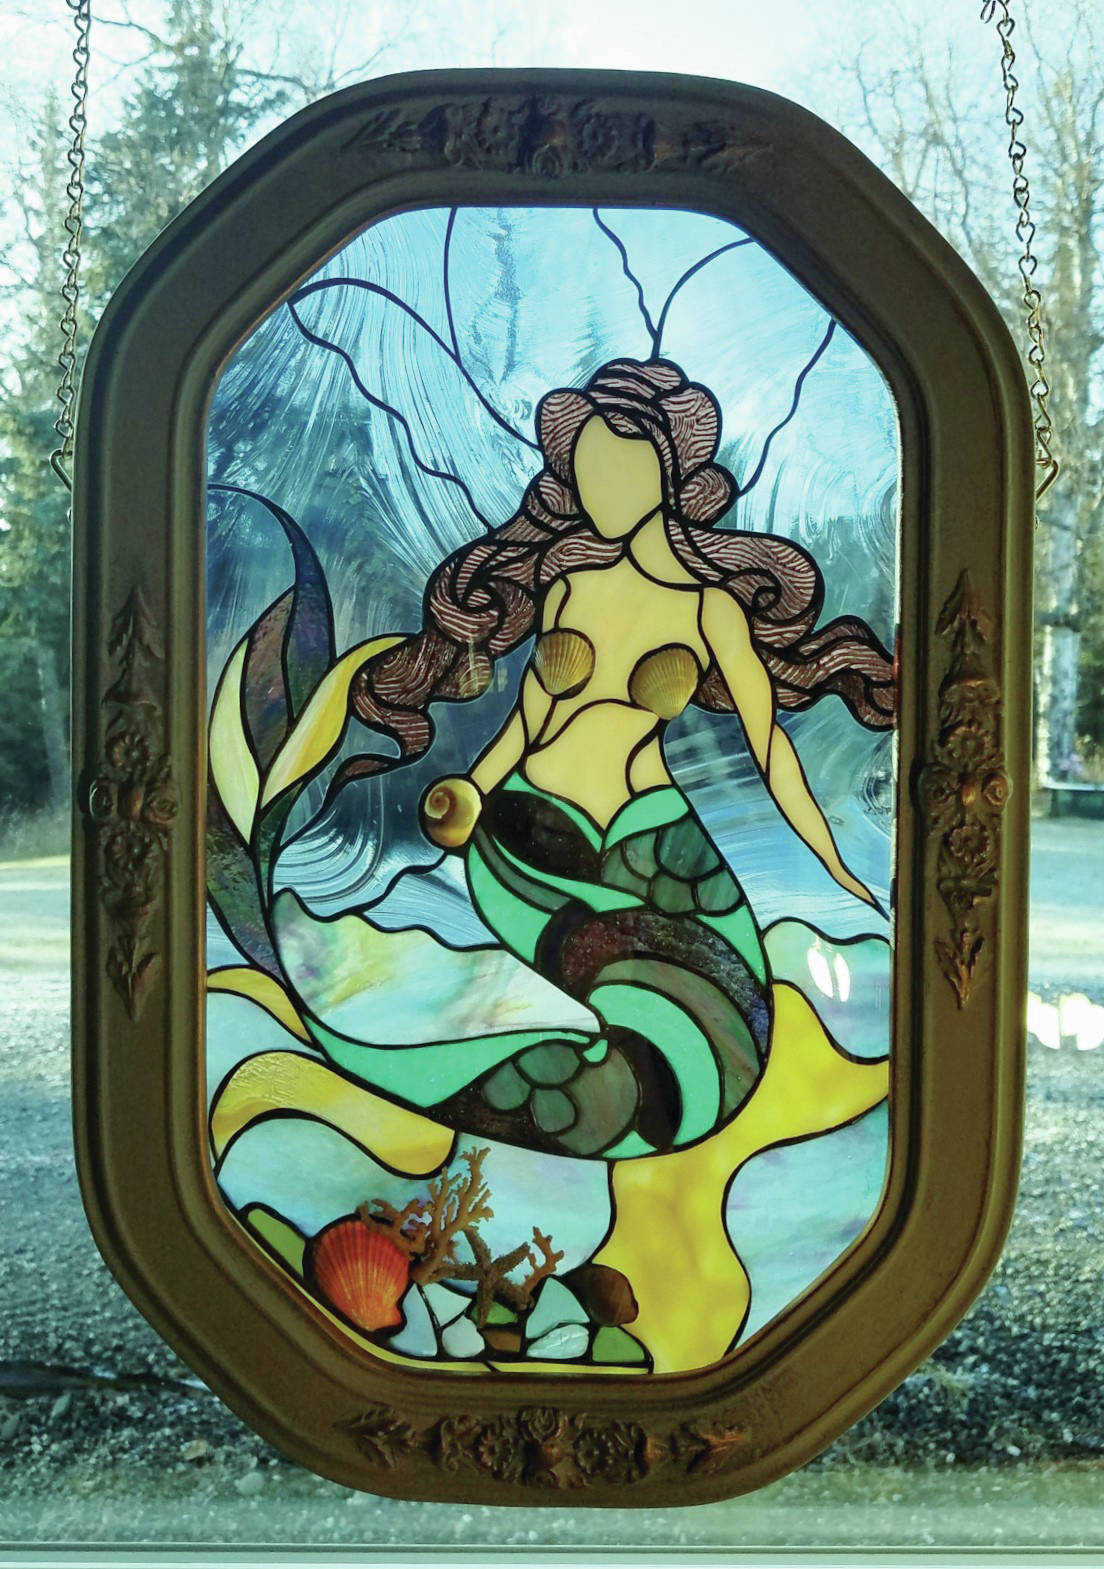 A piece from Linda Vizenor’s show, “Crystal Reflections,” opening on Friday, July 3, 2020, at the Homer Council on the Arts in Homer, Alaska. (Photo courtesy Homer Council on the Arts)